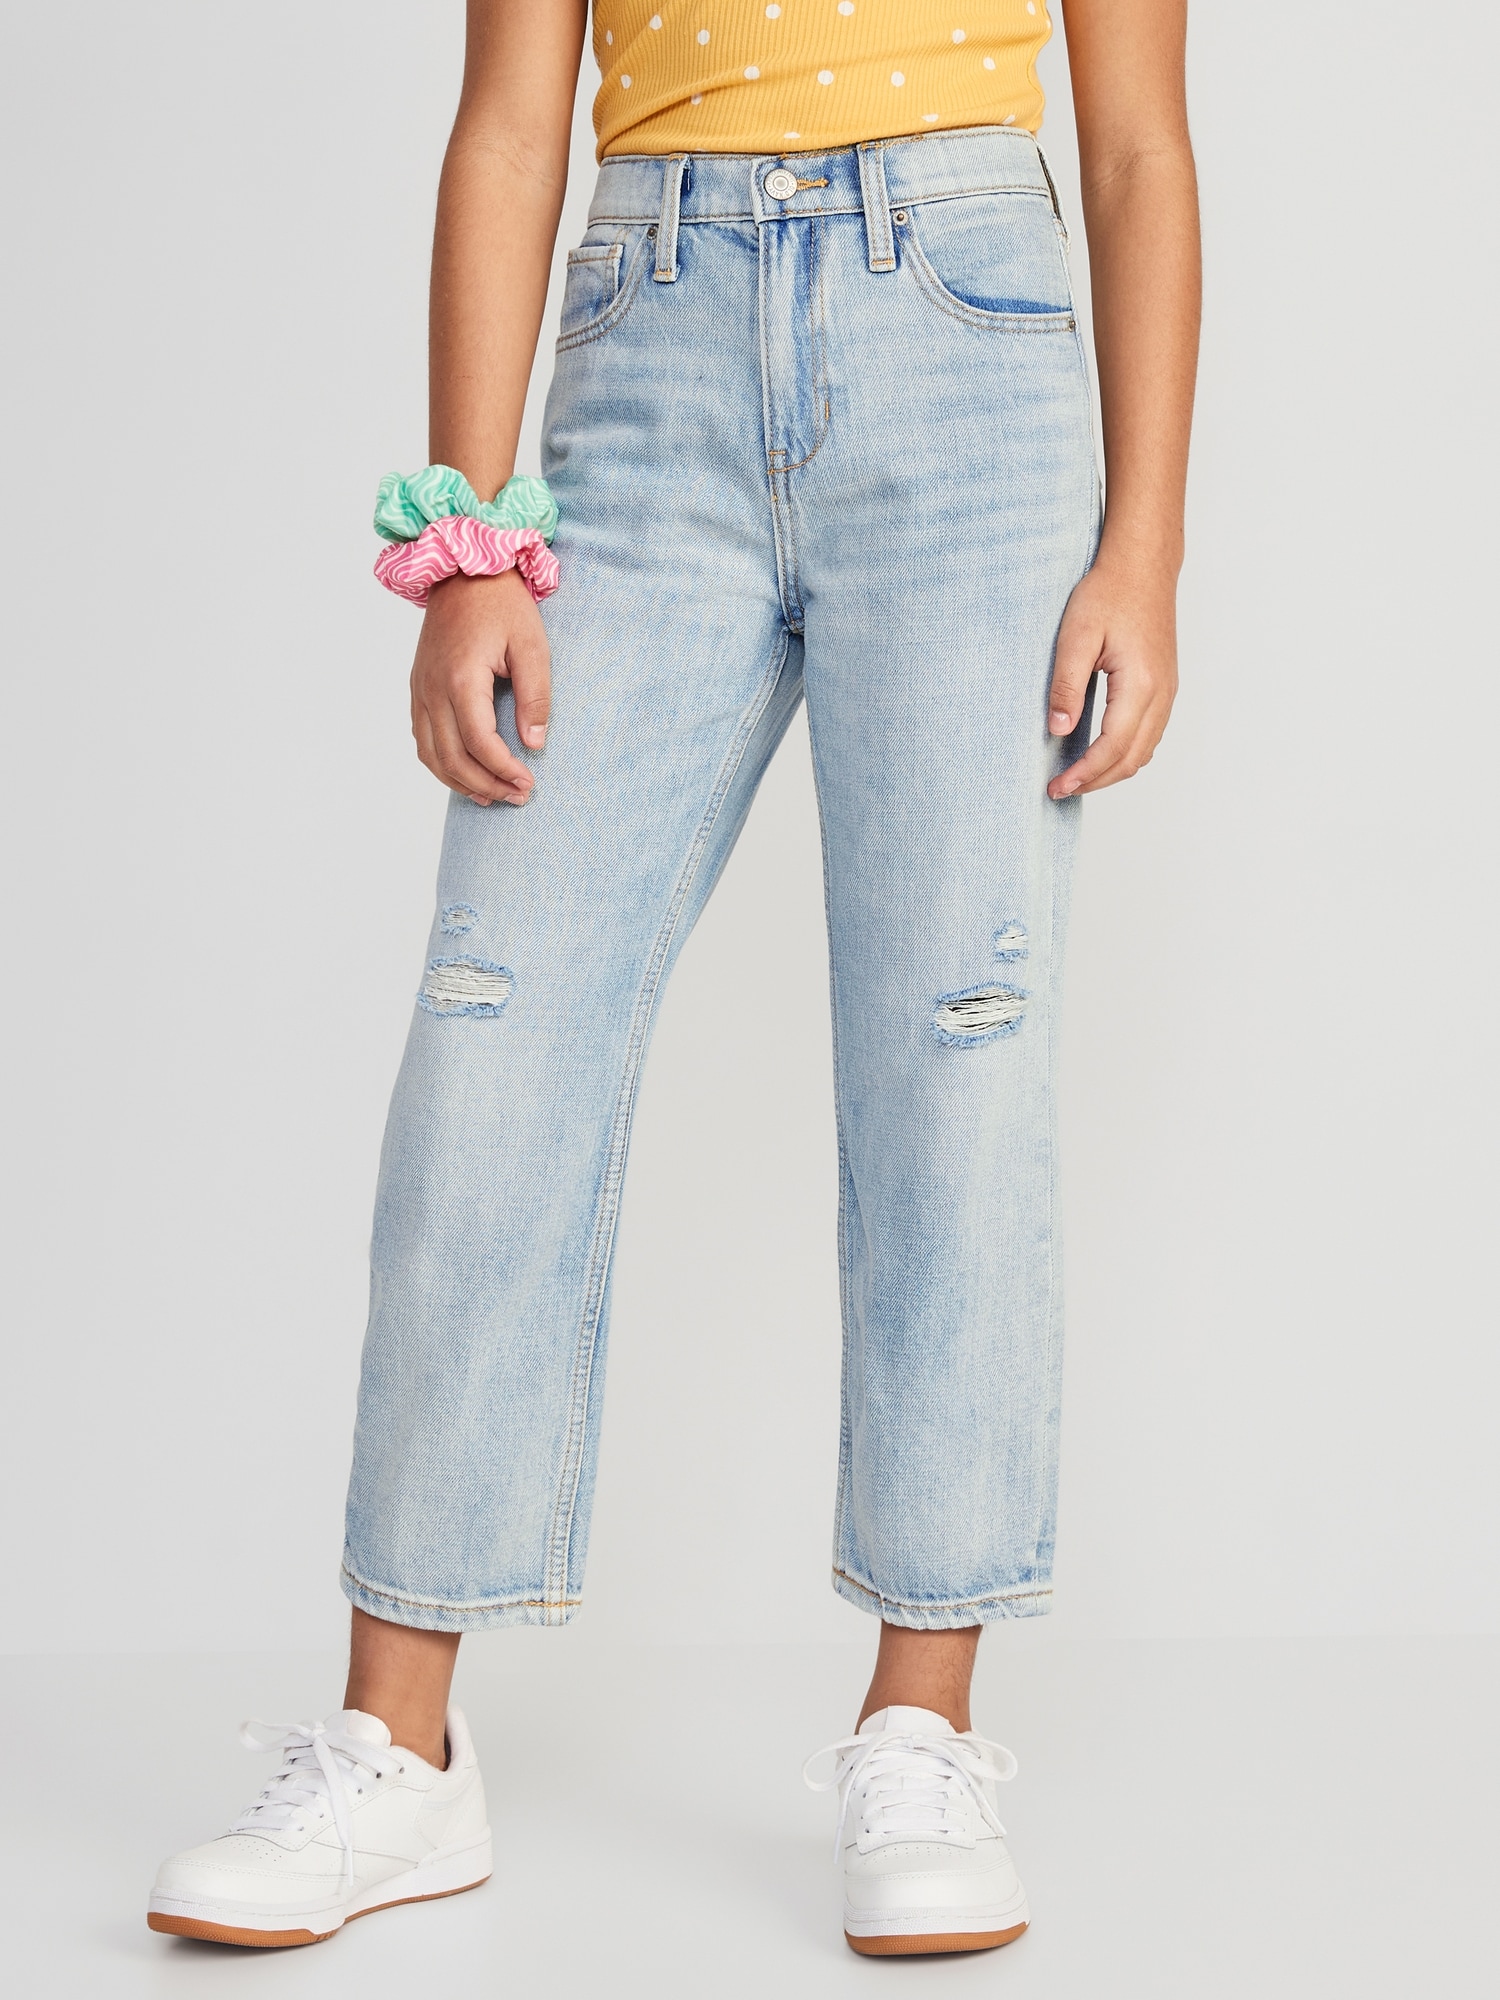 Grateful stretch Arabic High-Waisted Slouchy Straight Built-In Tough Jeans for Girls | Old Navy